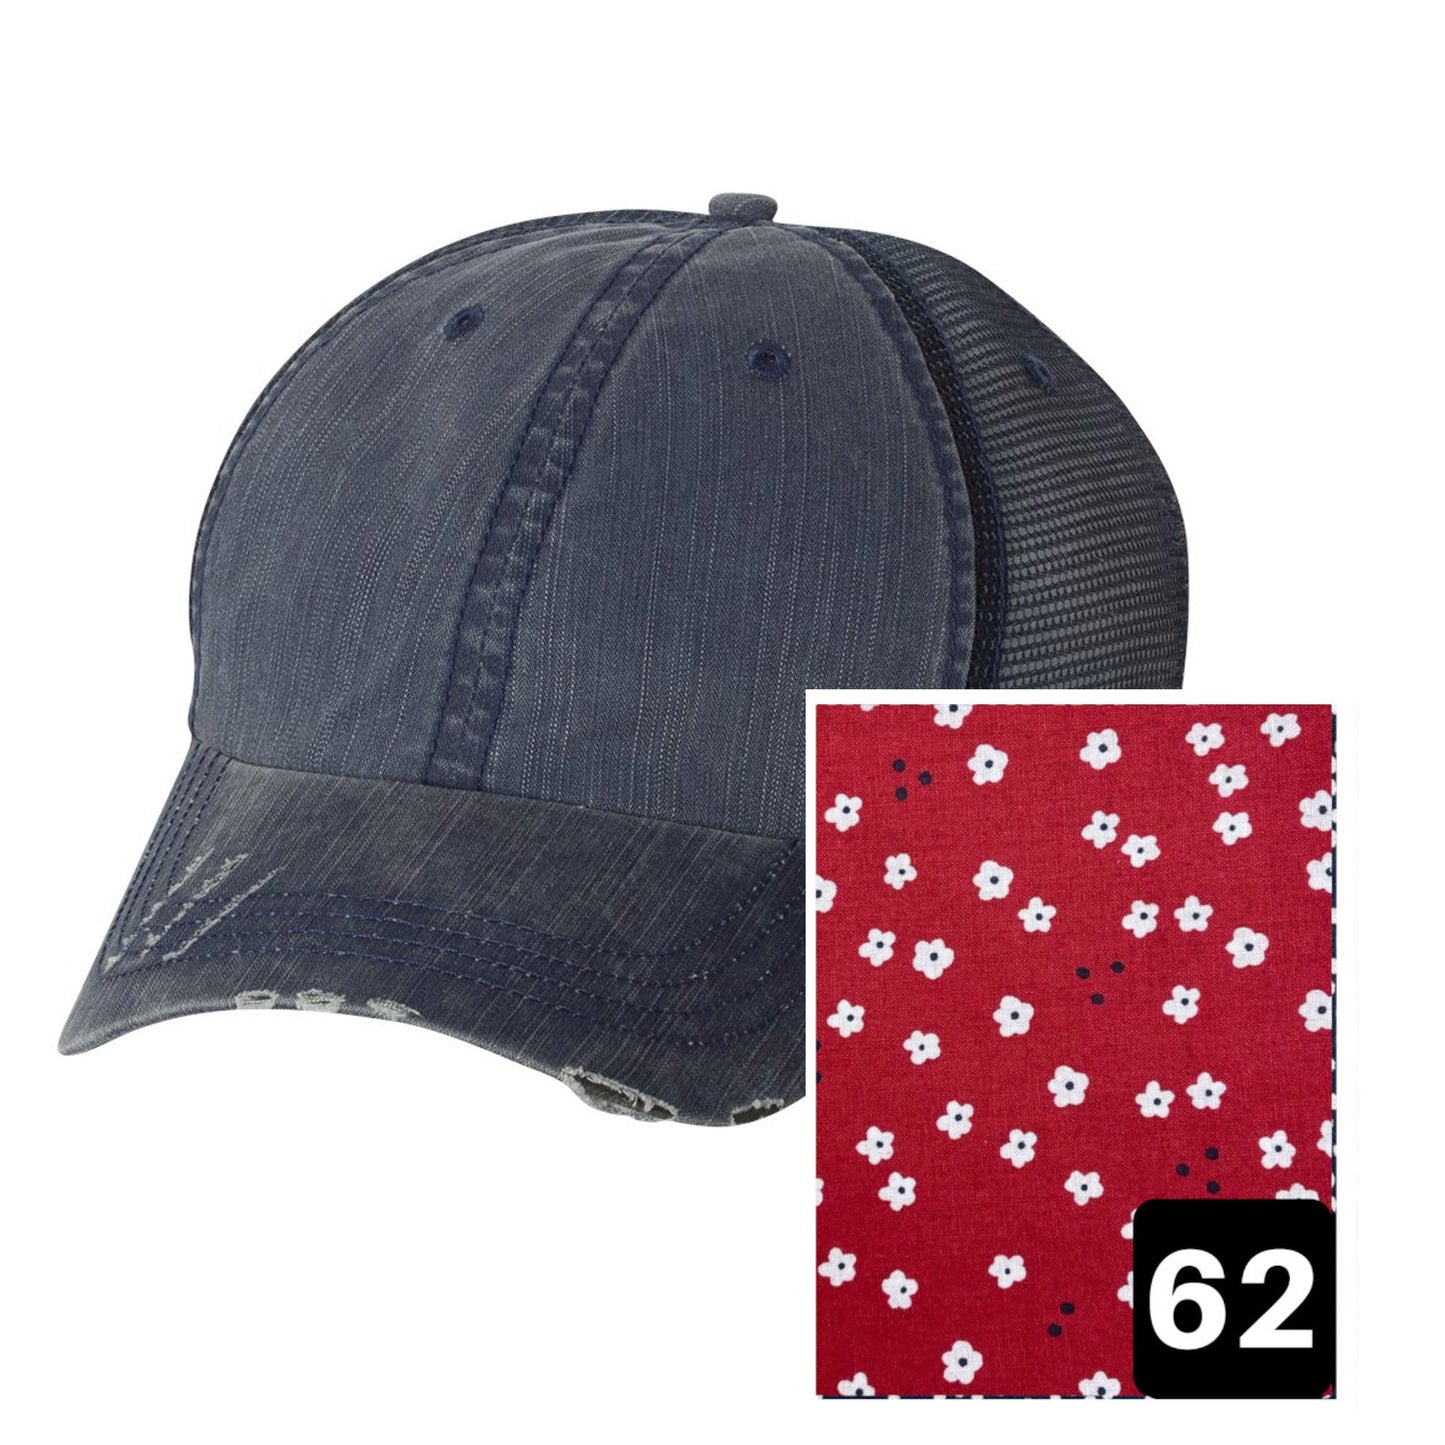 Texas Hat | Navy Distressed Trucker Cap | Many Fabric Choices